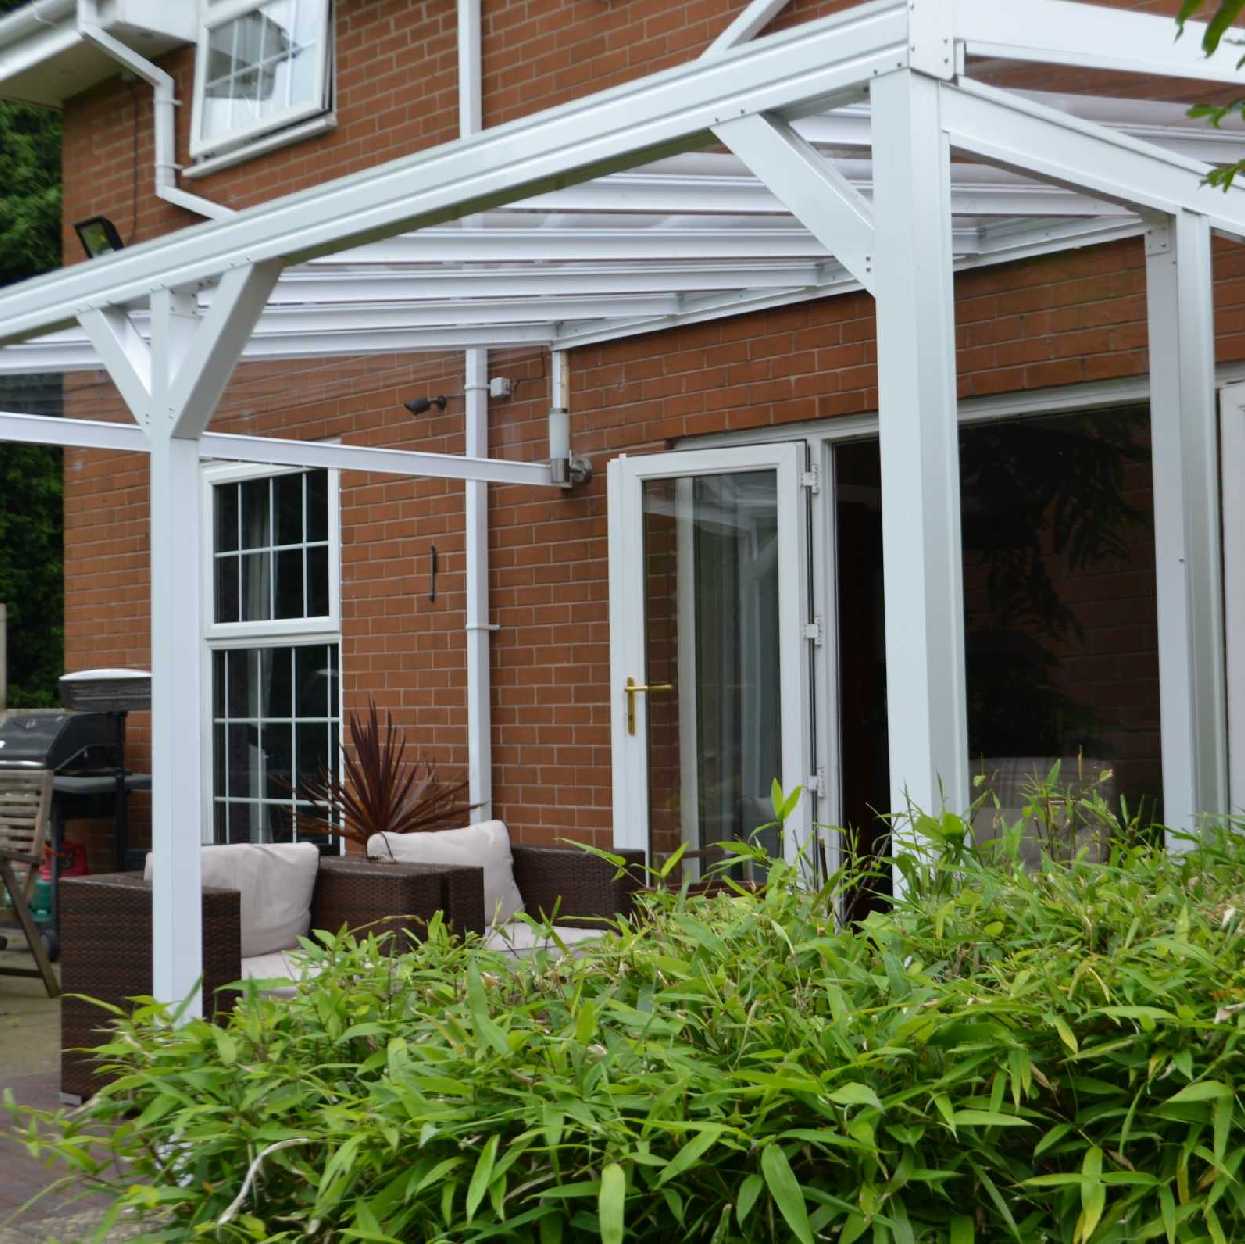 Omega Smart Lean-To Canopy, White with 6mm Glass Clear Plate Polycarbonate Glazing - 3.5m (W) x 3.5m (P), (3) Supporting Posts from Omega Build